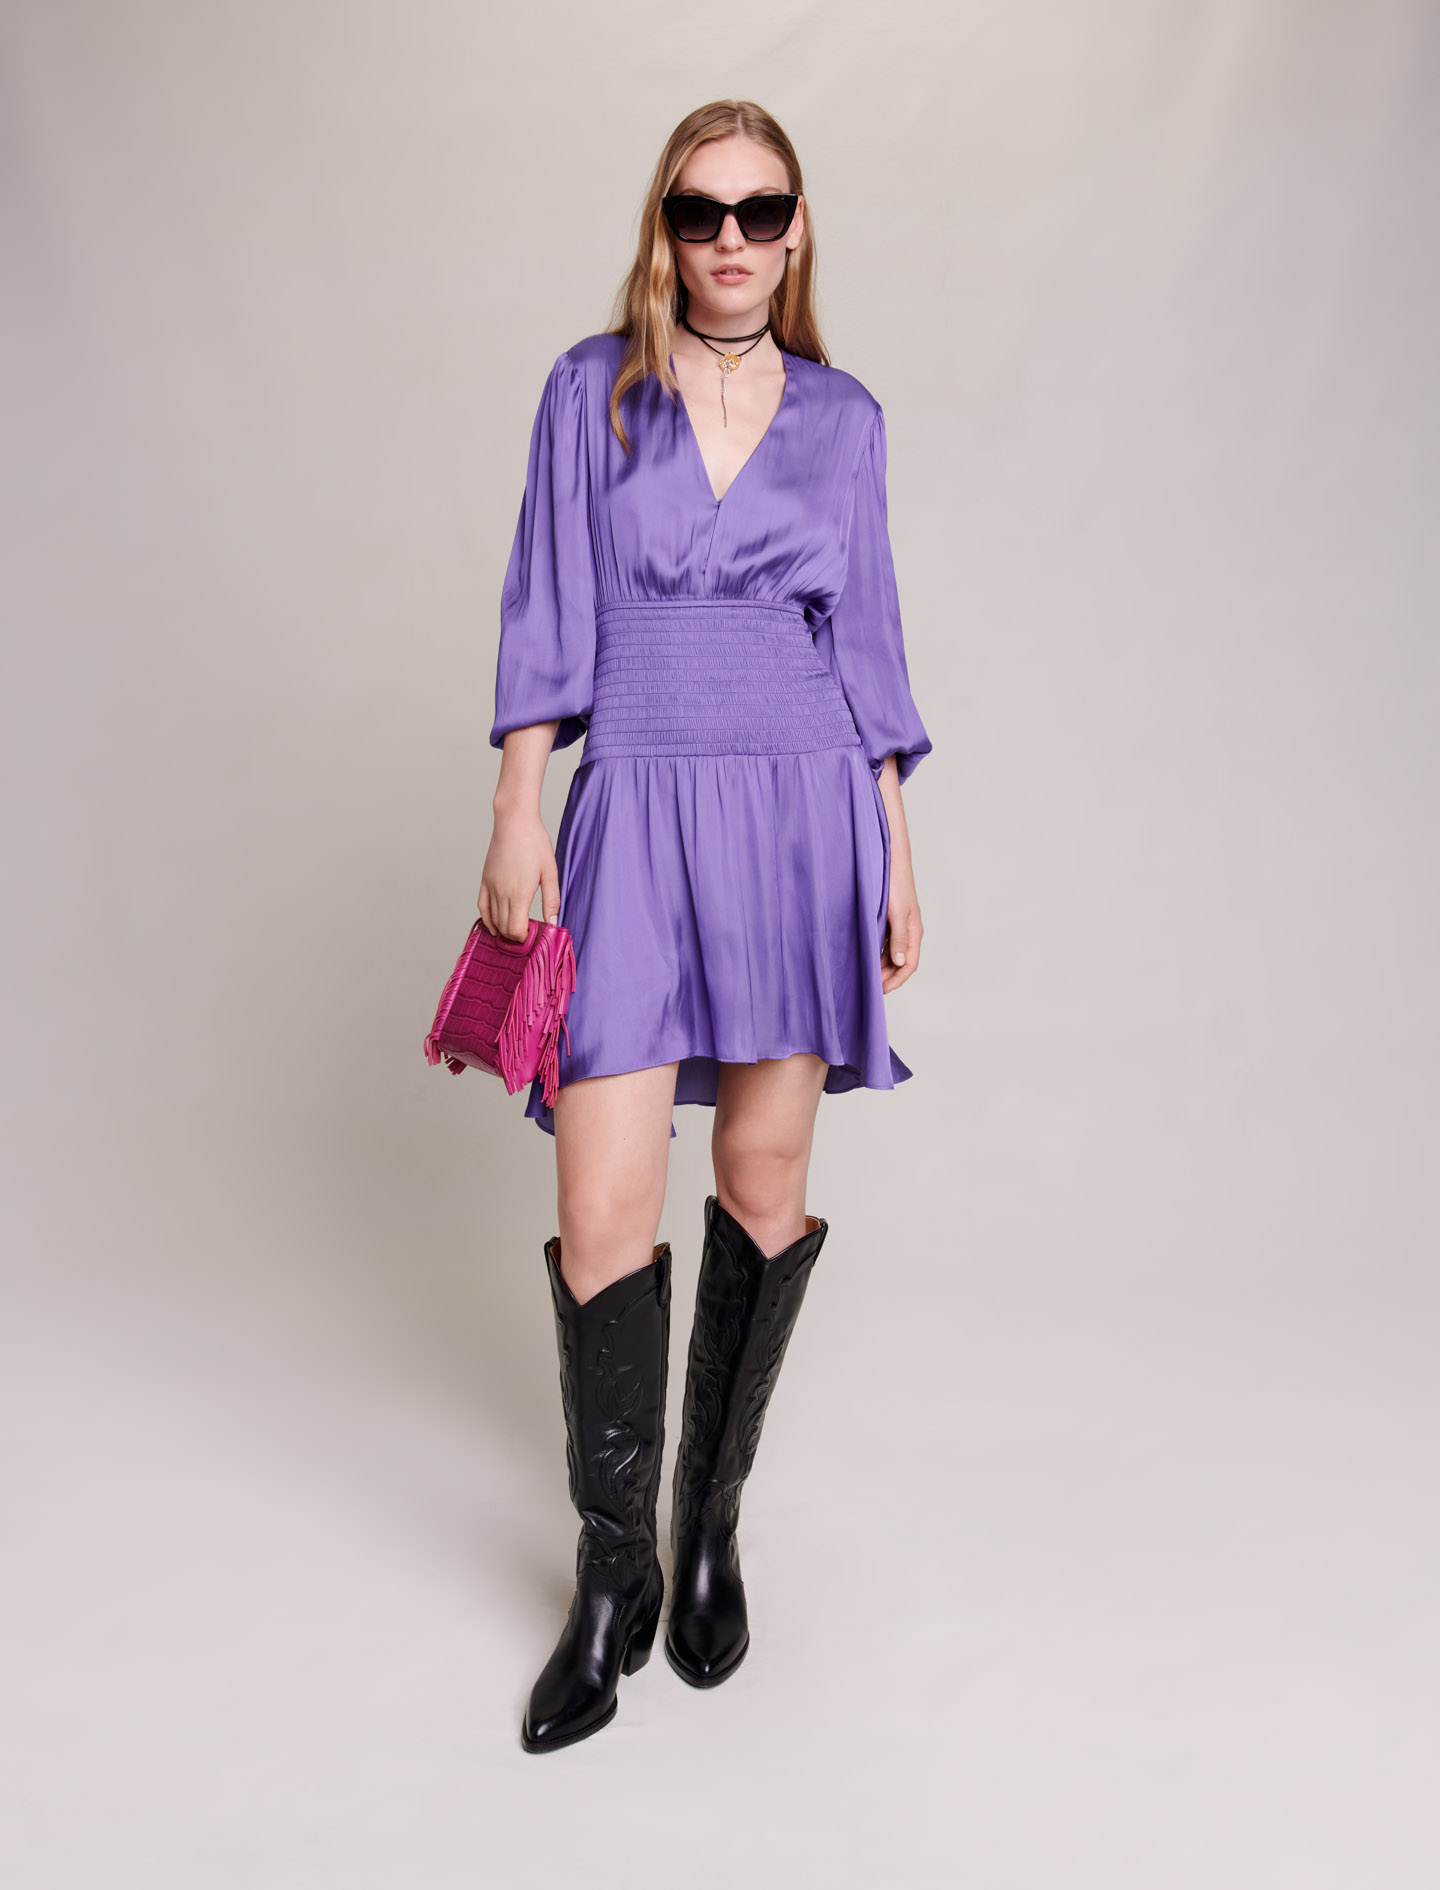 Maje Woman's polyester Short satin dress for Fall/Winter, in color Purple / Purple